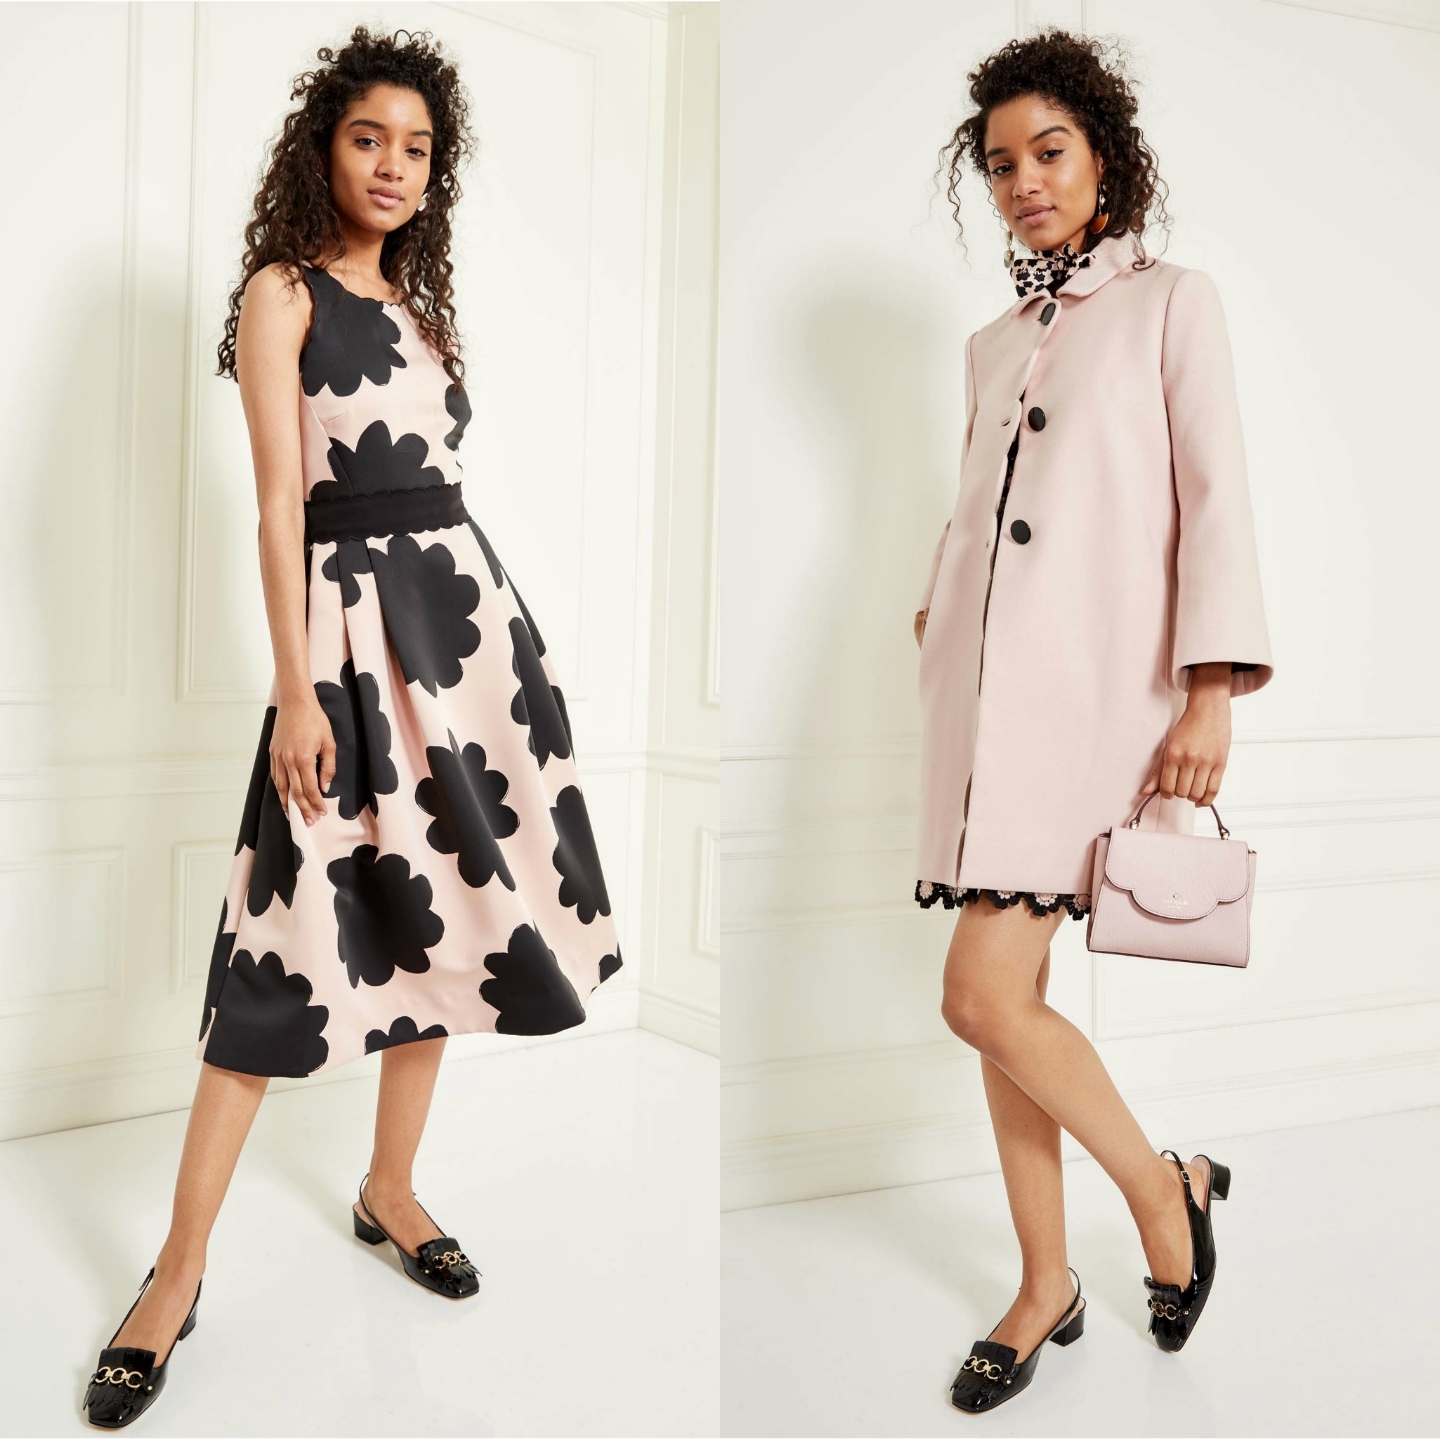 Eniwhere Fashion - Resort Collection - Kate Spade